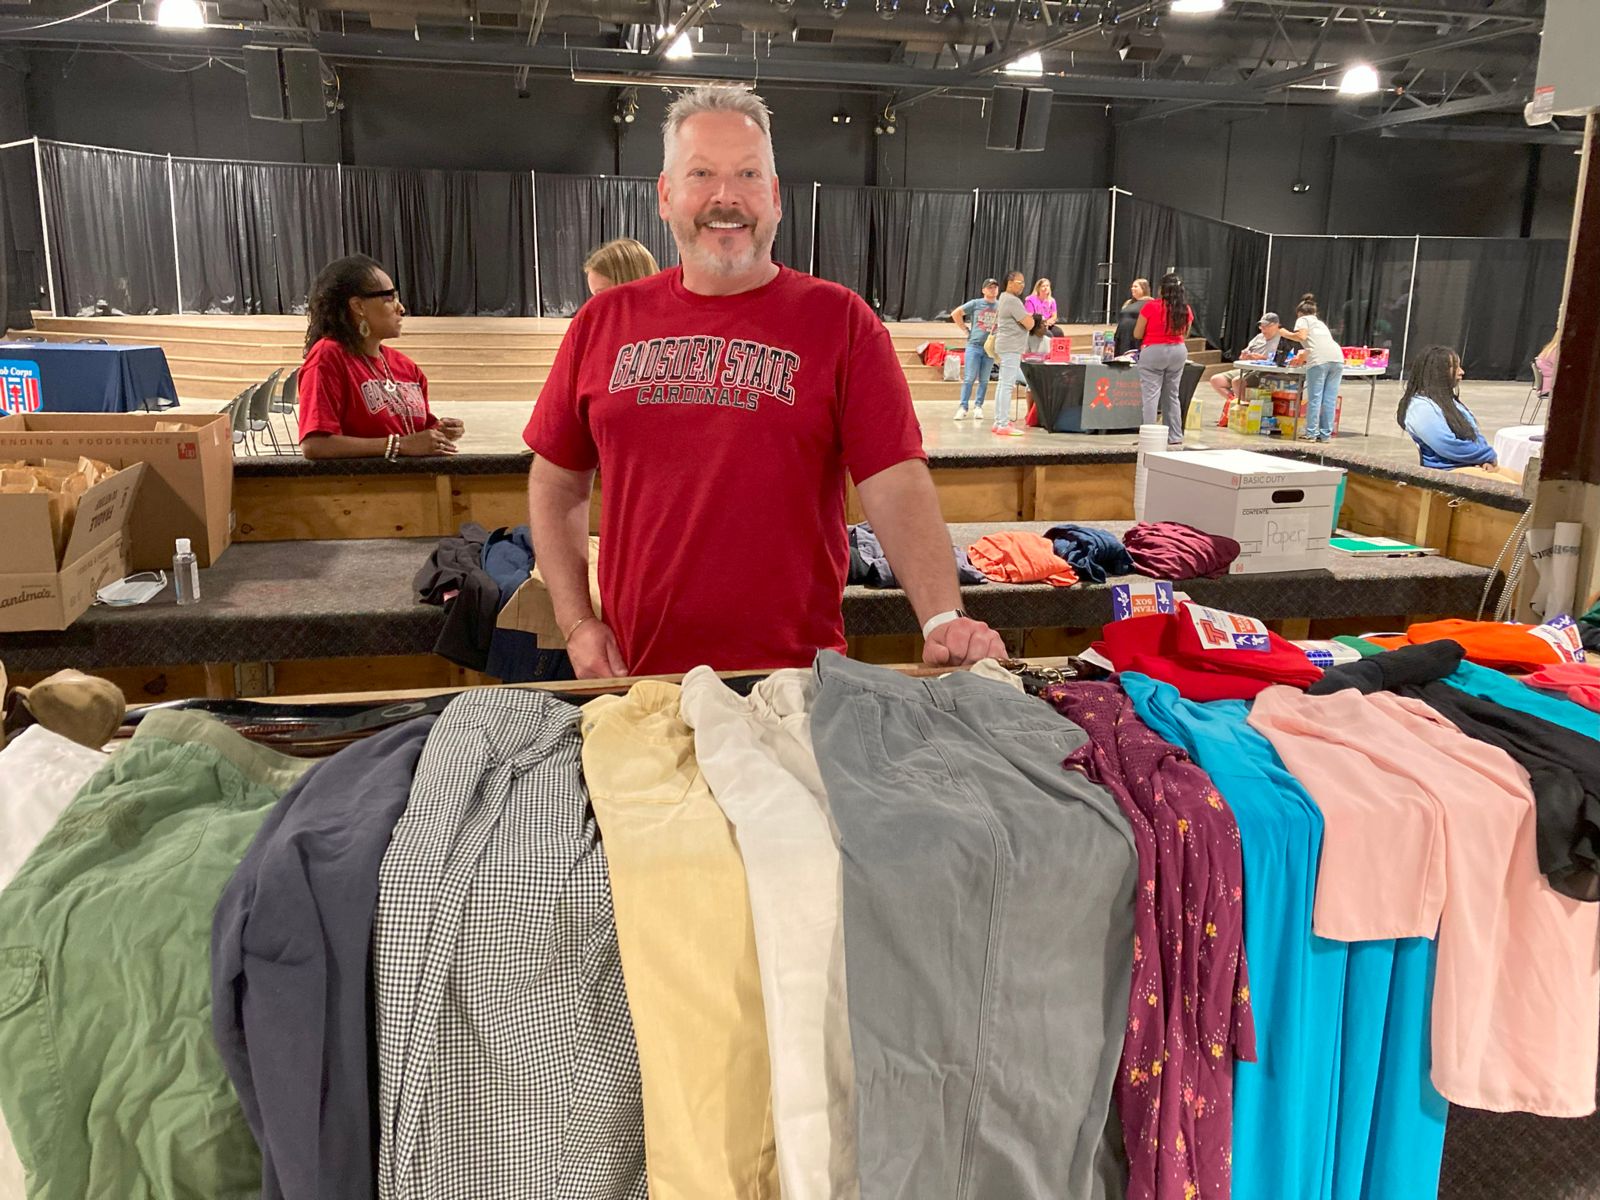 Dr. Joey Battles, dean of Health Sciences at Gadsden State, assisted Project Homeless Connect by distributing free clothes to homeless participants.